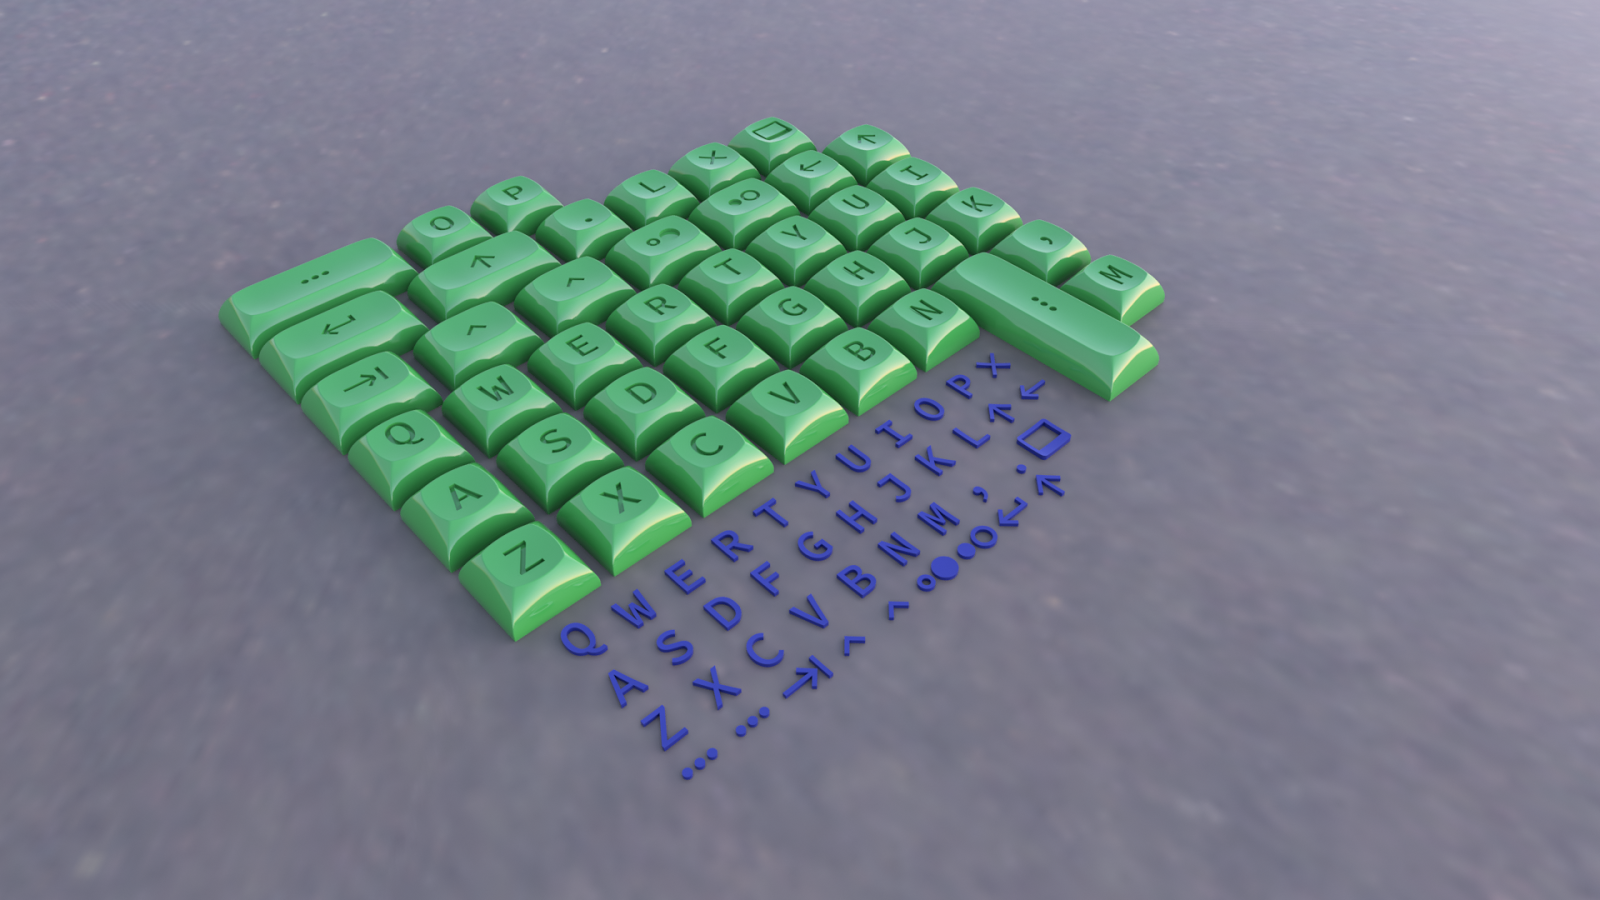 "Doubleshot" 3D Printed Keycaps